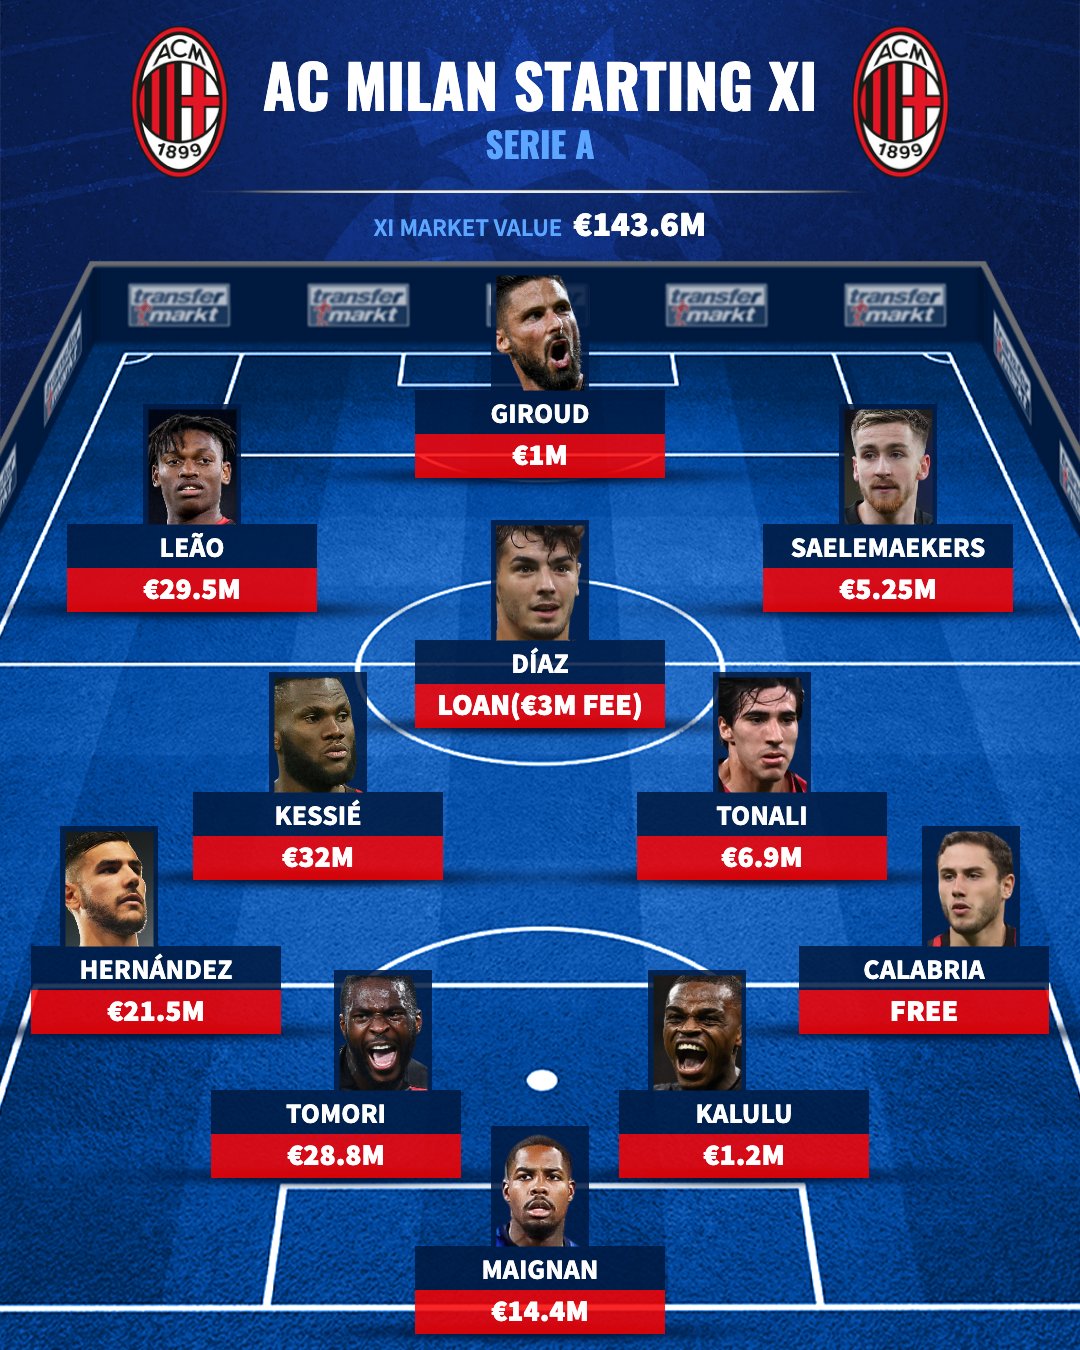 Transfermarkt.co.uk on Twitter: "AC Milan's most often used starting XI  that won this season's Serie A only cost €143.6m 😵  https://t.co/8ECXCd9Tw0" / Twitter